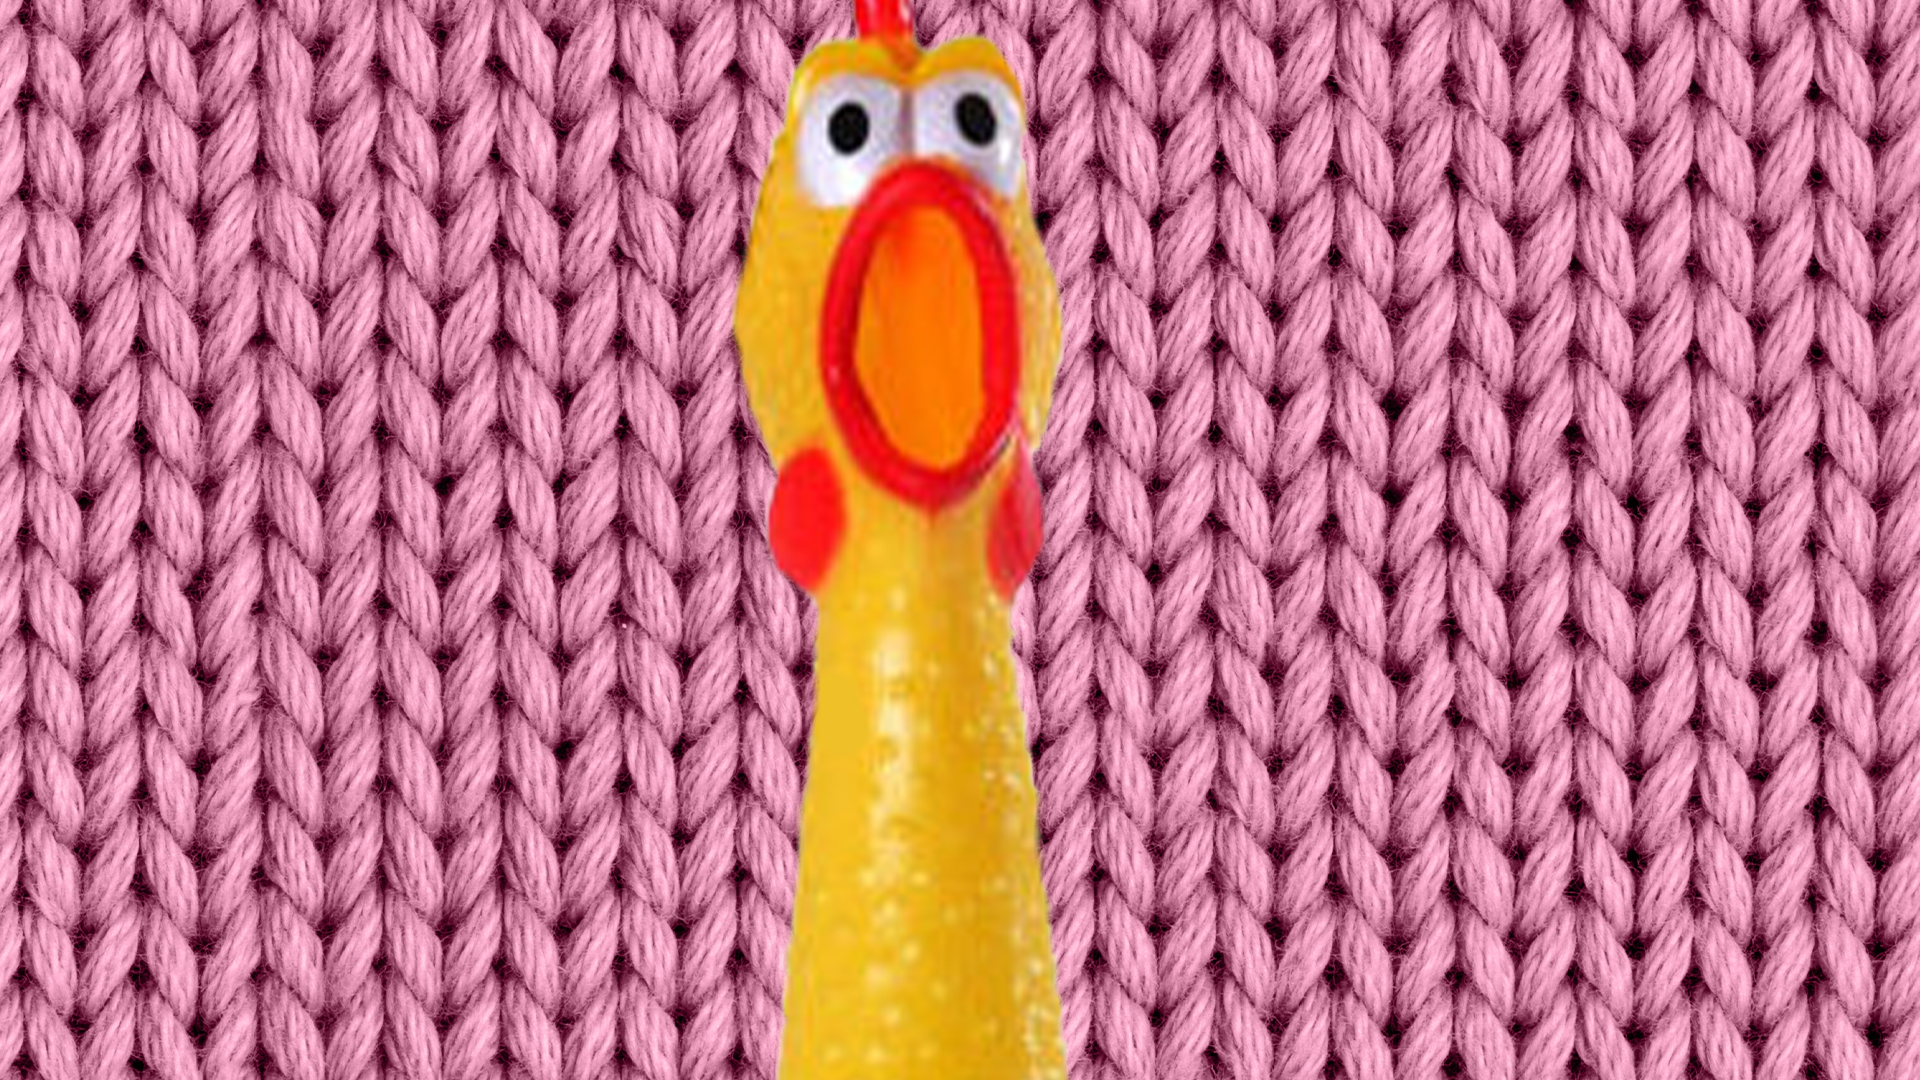 Rubber chicken on knitted background